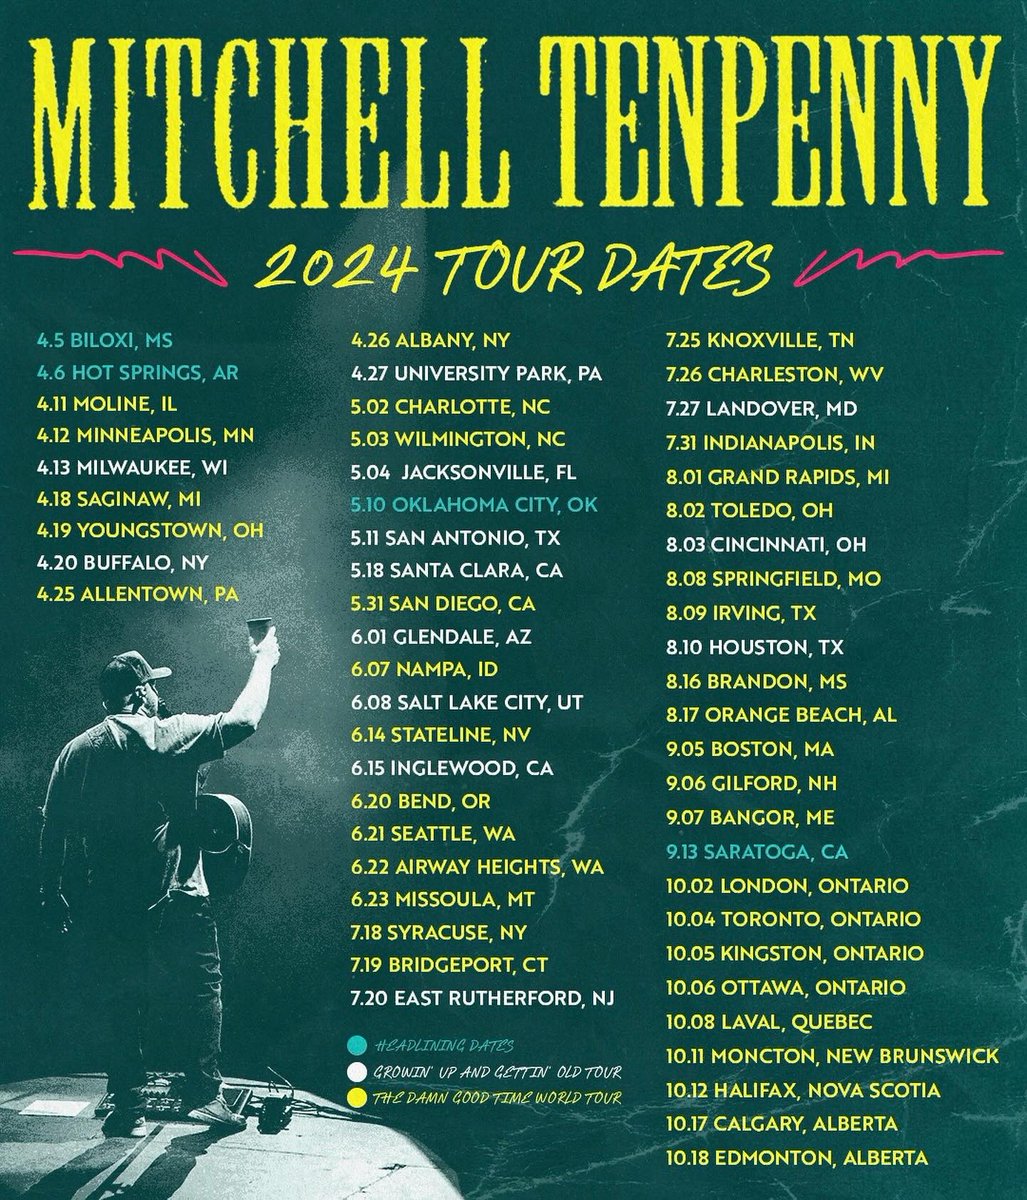 Here we go!!! Let me know where I’m going to see ya’ll!⚡️⚡️⚡️Grab your tickets and meet & greets now! mitchell10penny.com